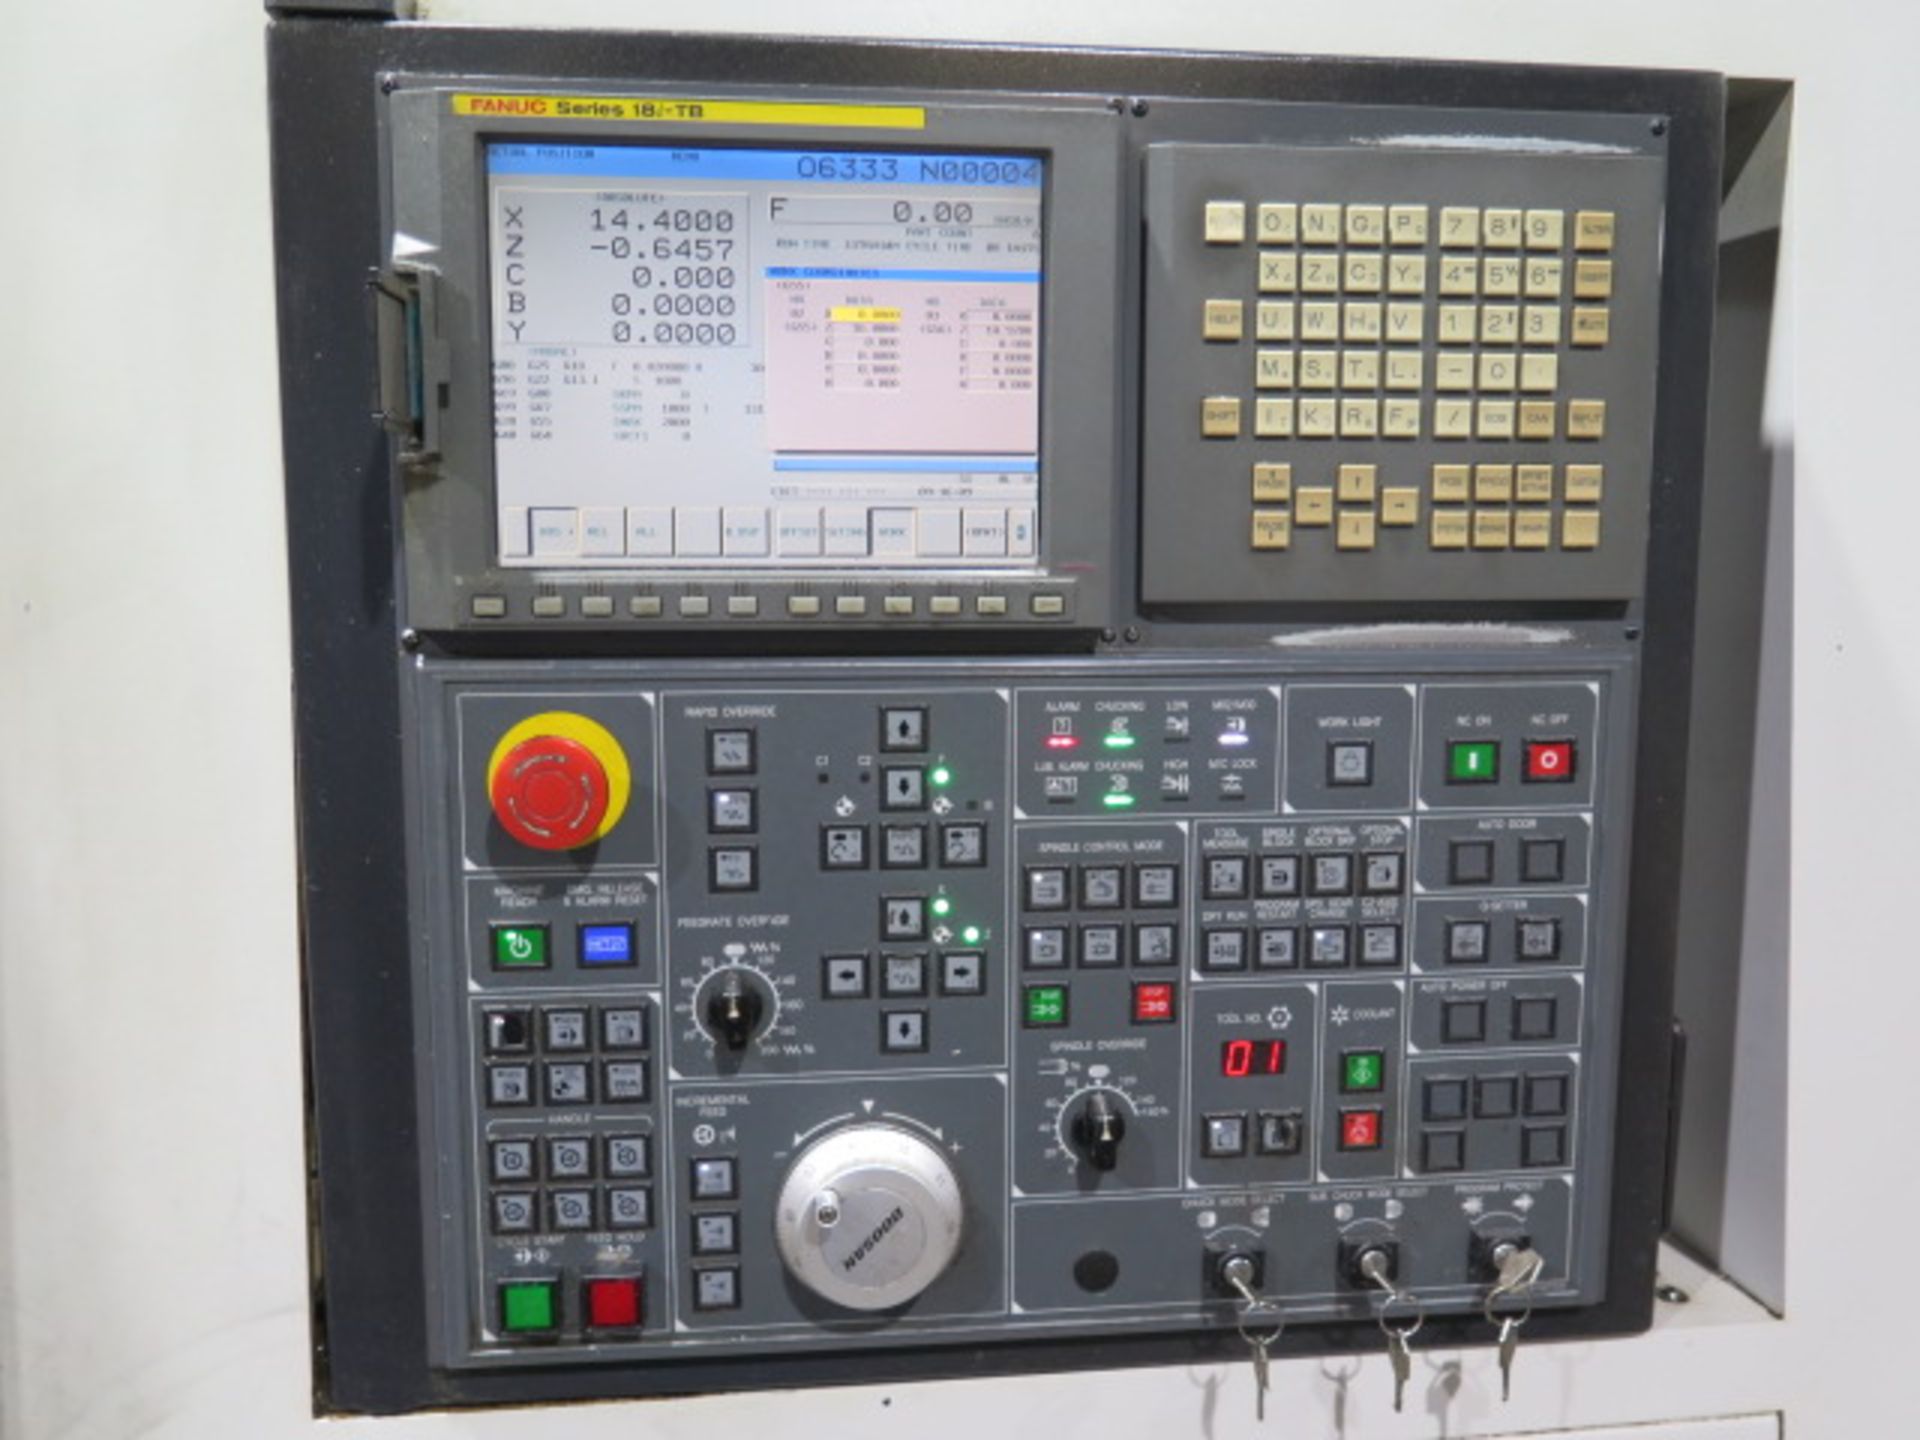 2007 Doosan PUMA 2000SY Twin Spindle CNC Turning Center s/n P200SY0835 w/ Fanuc 18i-TB, SOLD AS IS - Image 16 of 21